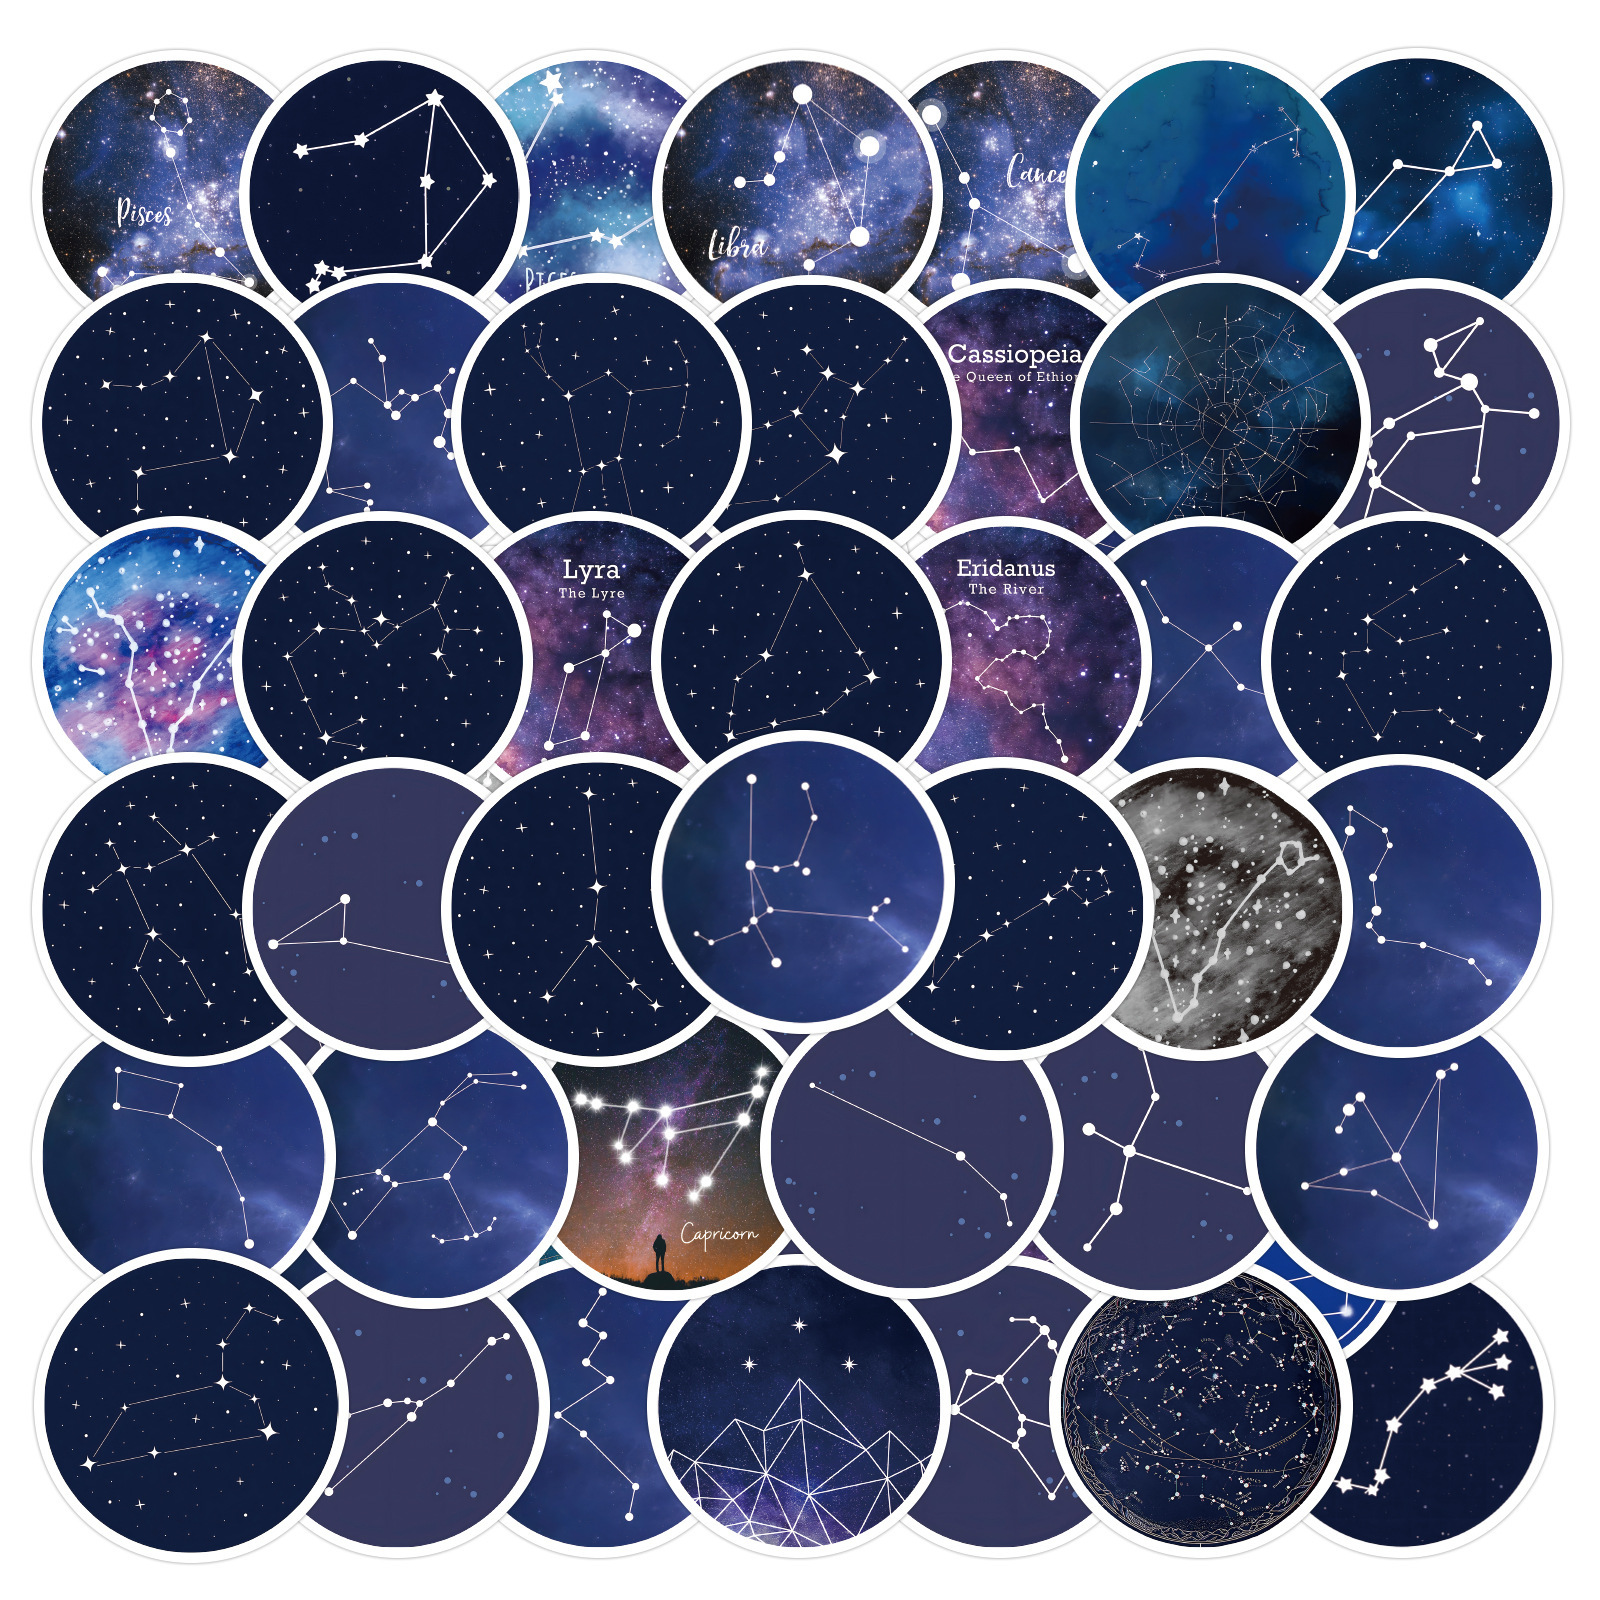 60pcs Astrology Stickers,Vintage Aesthetic Magic Stickers,Zodiac Celestial  Stickers For Water Bottles, Laptops,Scrapbooks,Skateboards,Phone,Gifts For